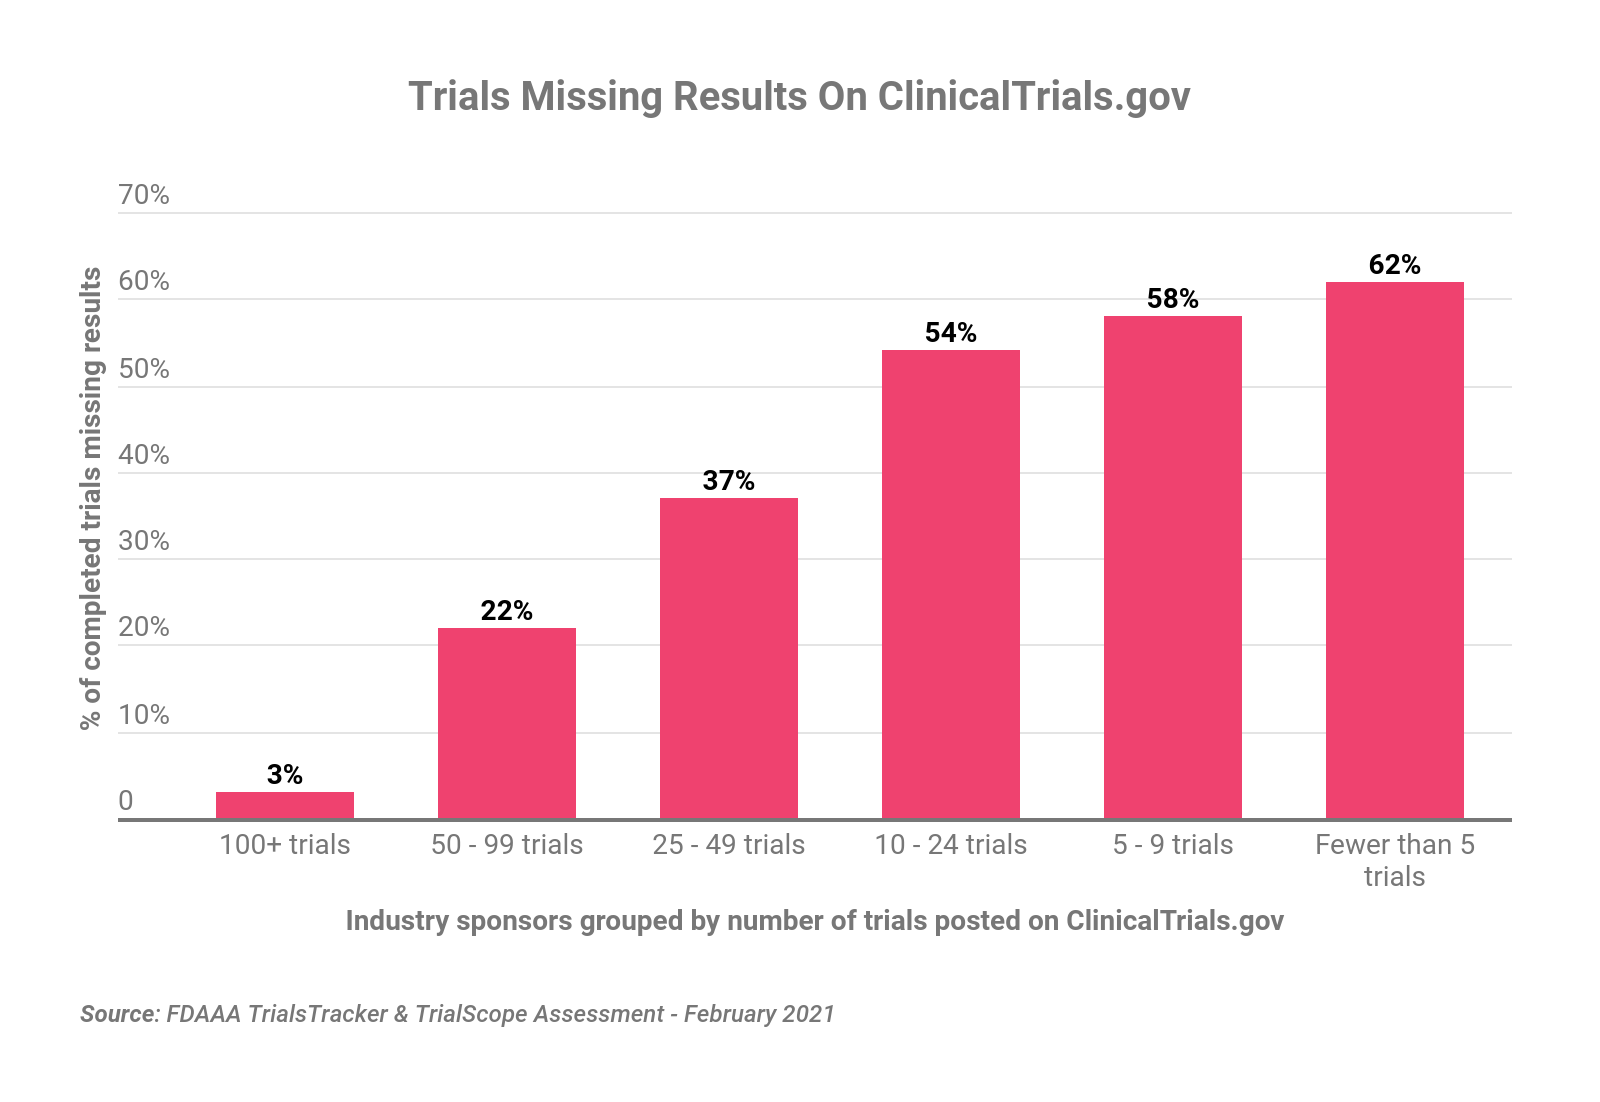 Trials missing results on ClinicalTrials.gov